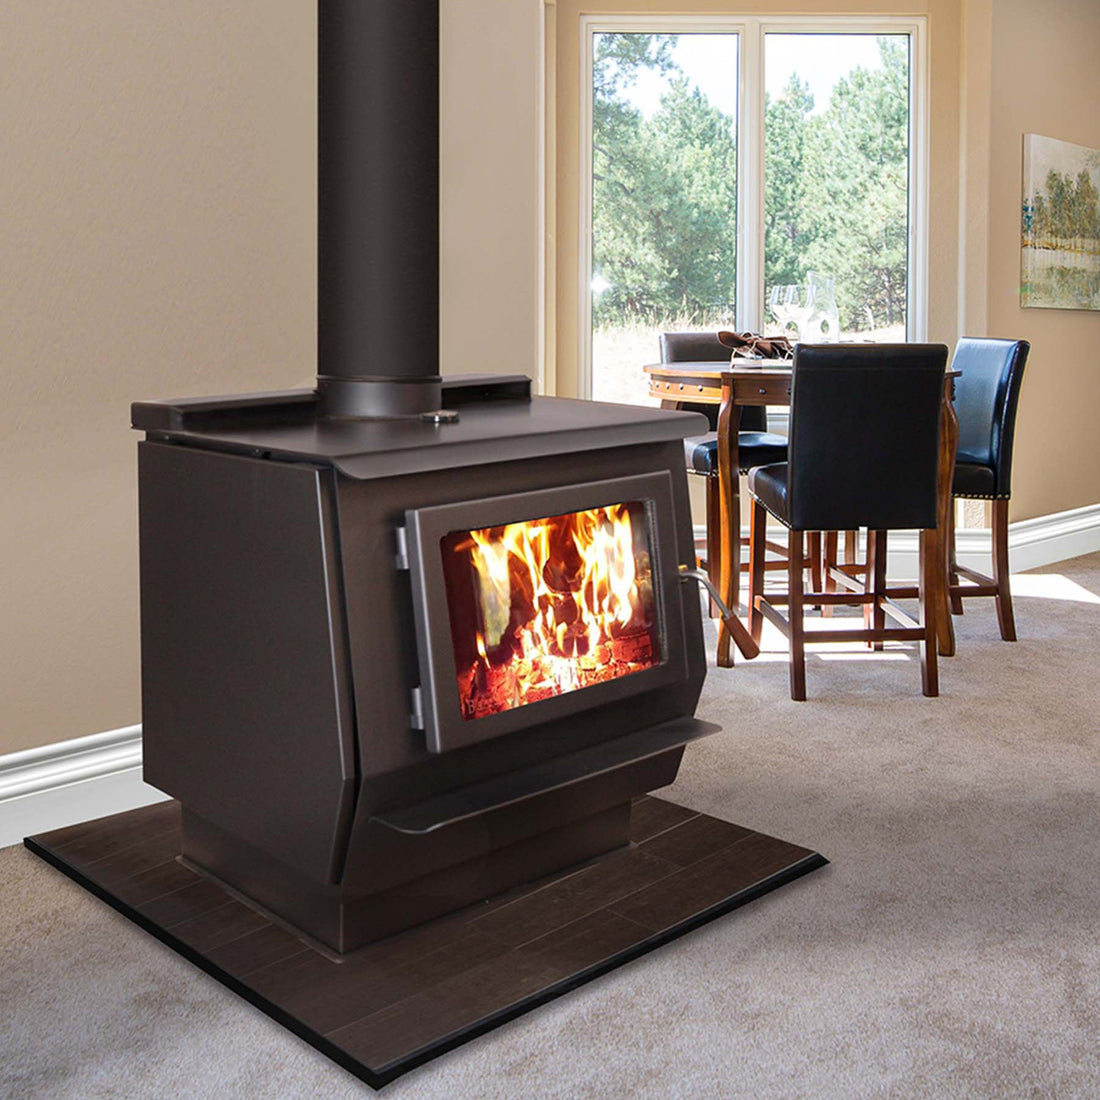 What to expect from the most efficient wood stove: a Blaze King Wood Fireplace